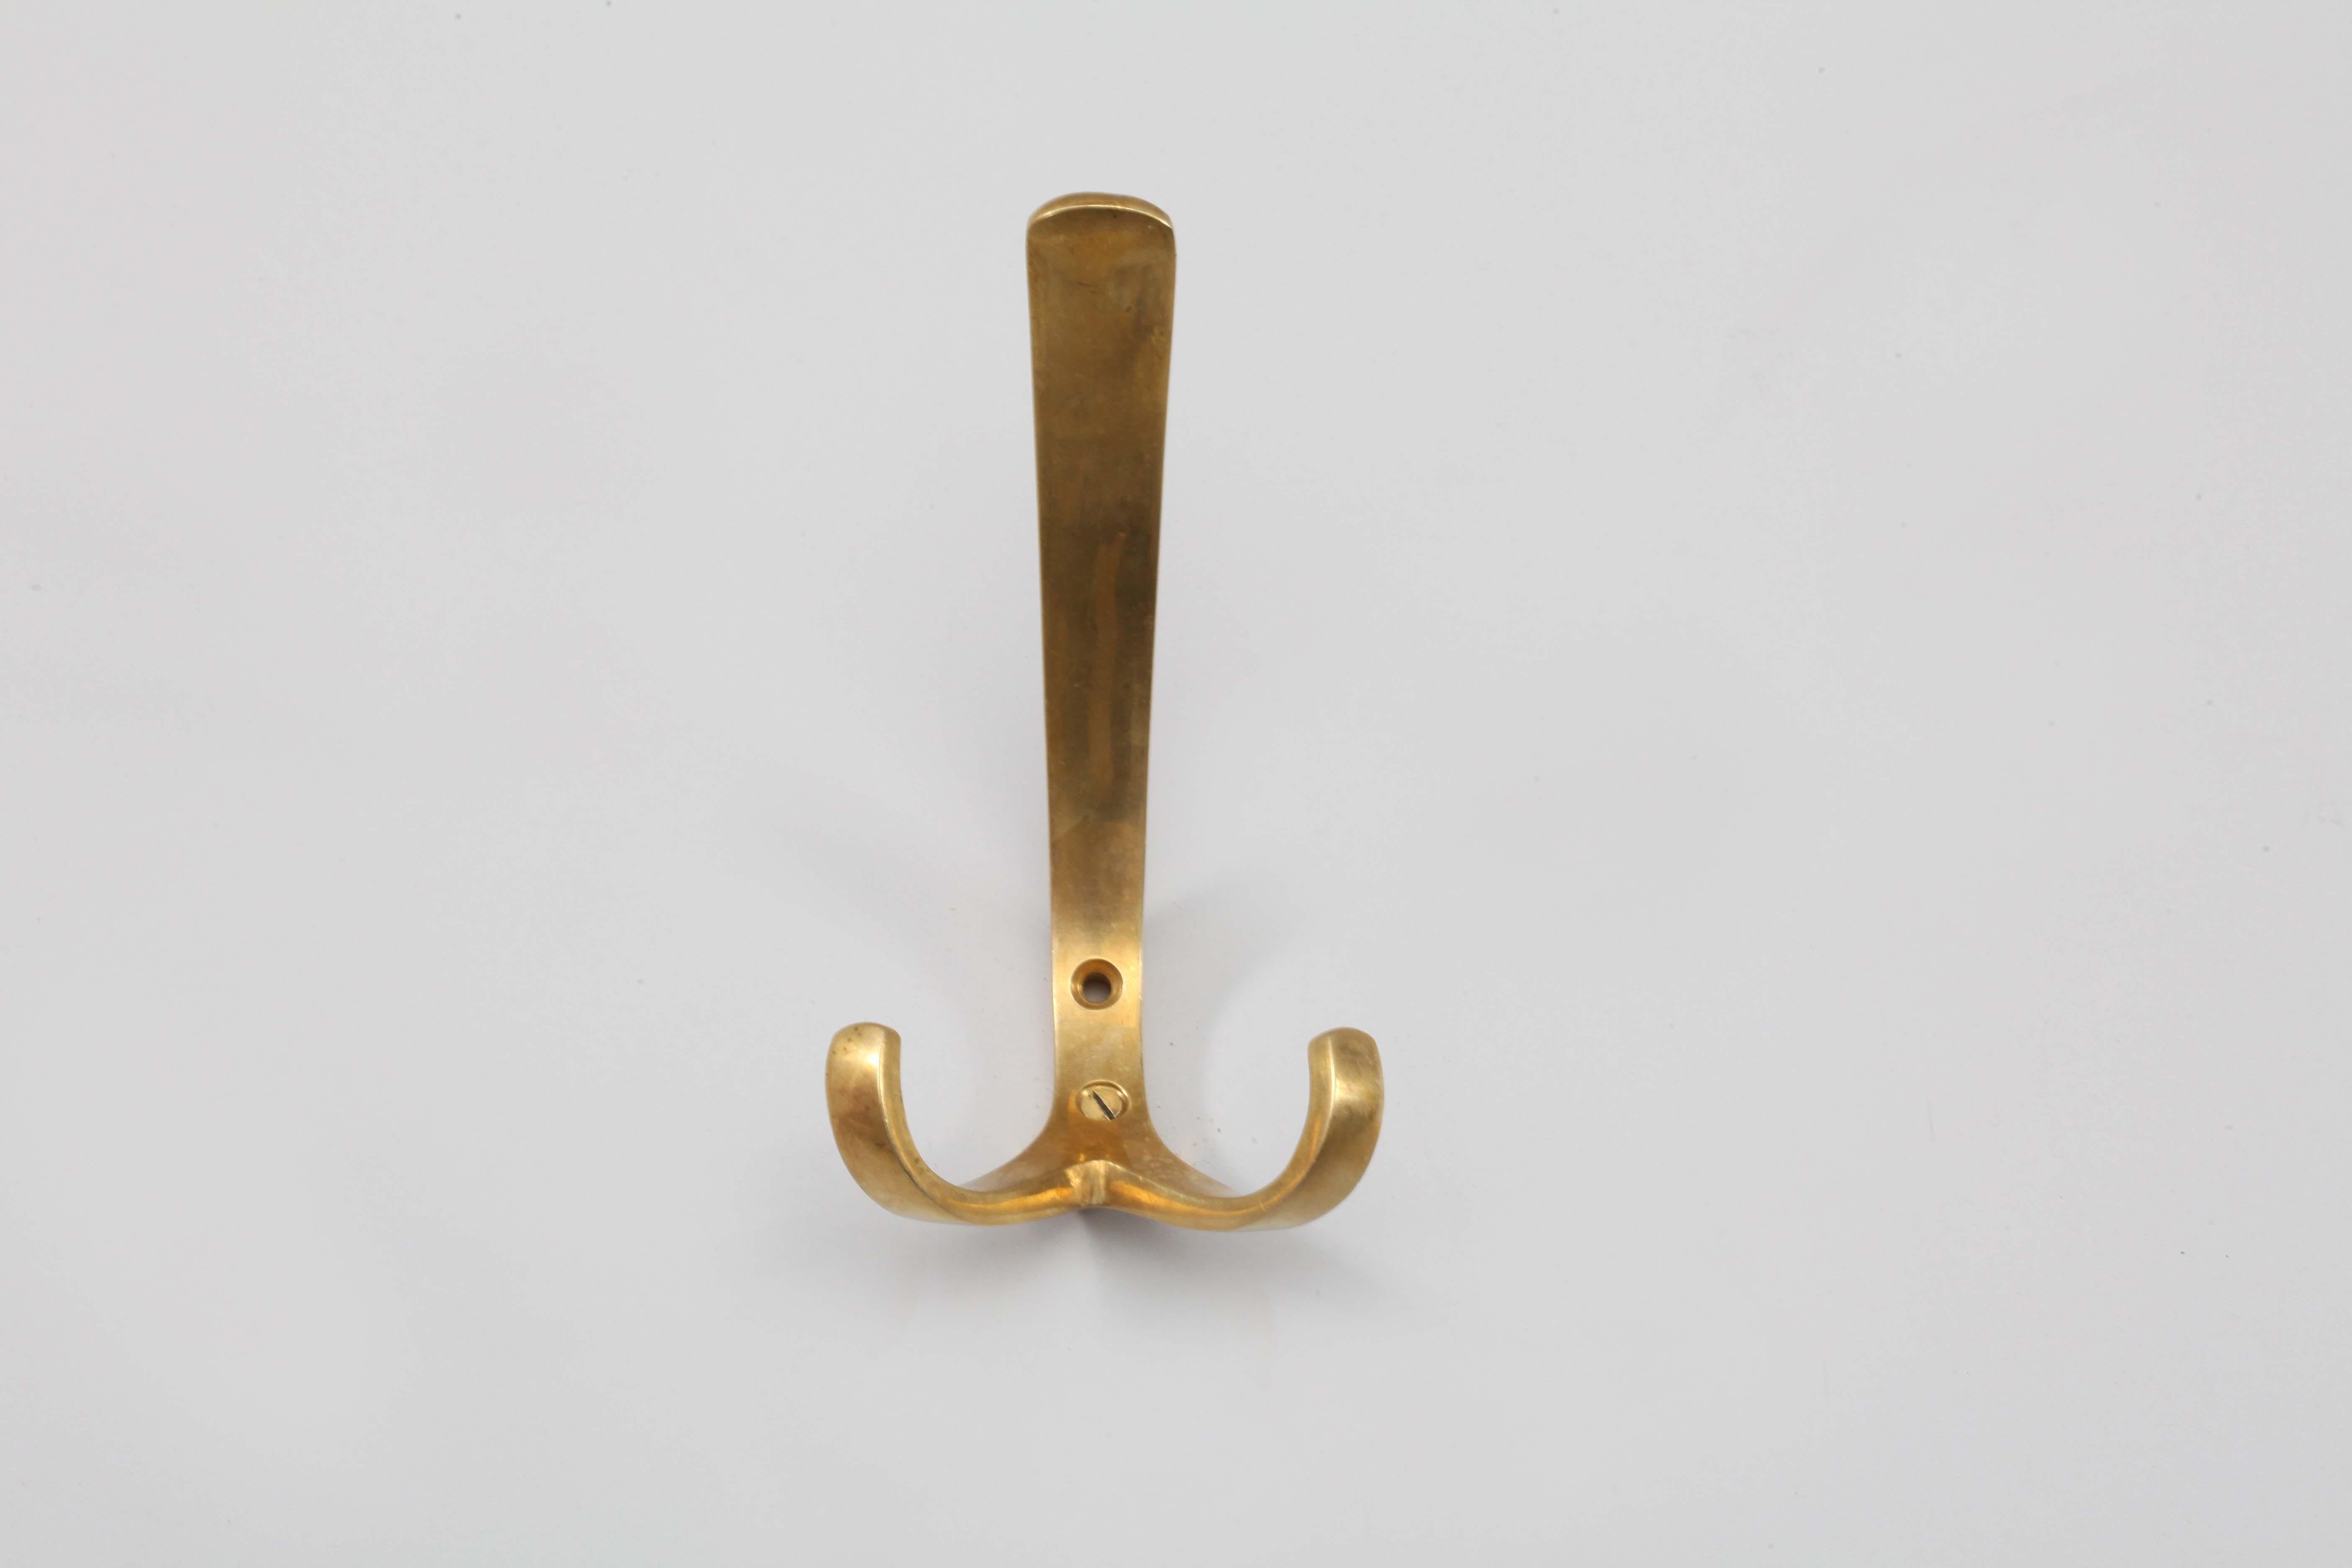 Five wall-mounted brass hooks, with a contrasting faux patina. 
Designed by Herha Baller,
Vienna, 1950.
Measures: height 6 inch (16cm), width 3 inch (7cm), depth 4 inch (11cm).